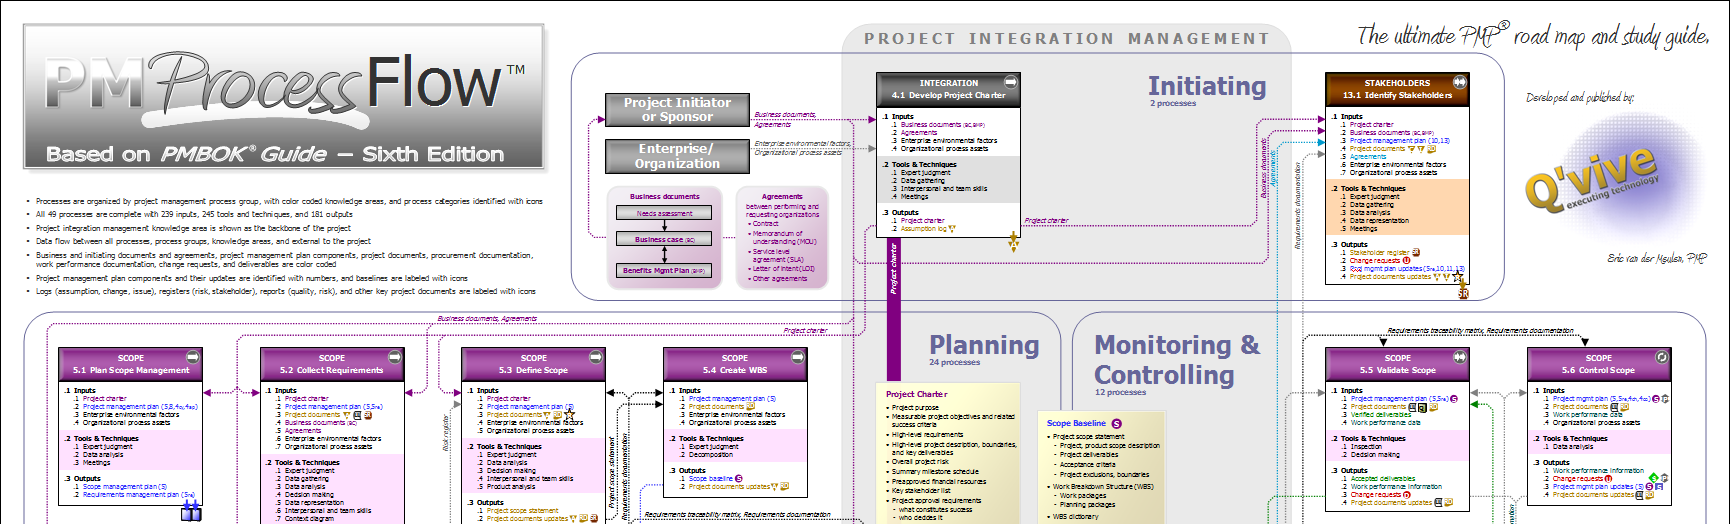 Pmp Process Flow Chart 6th Edition